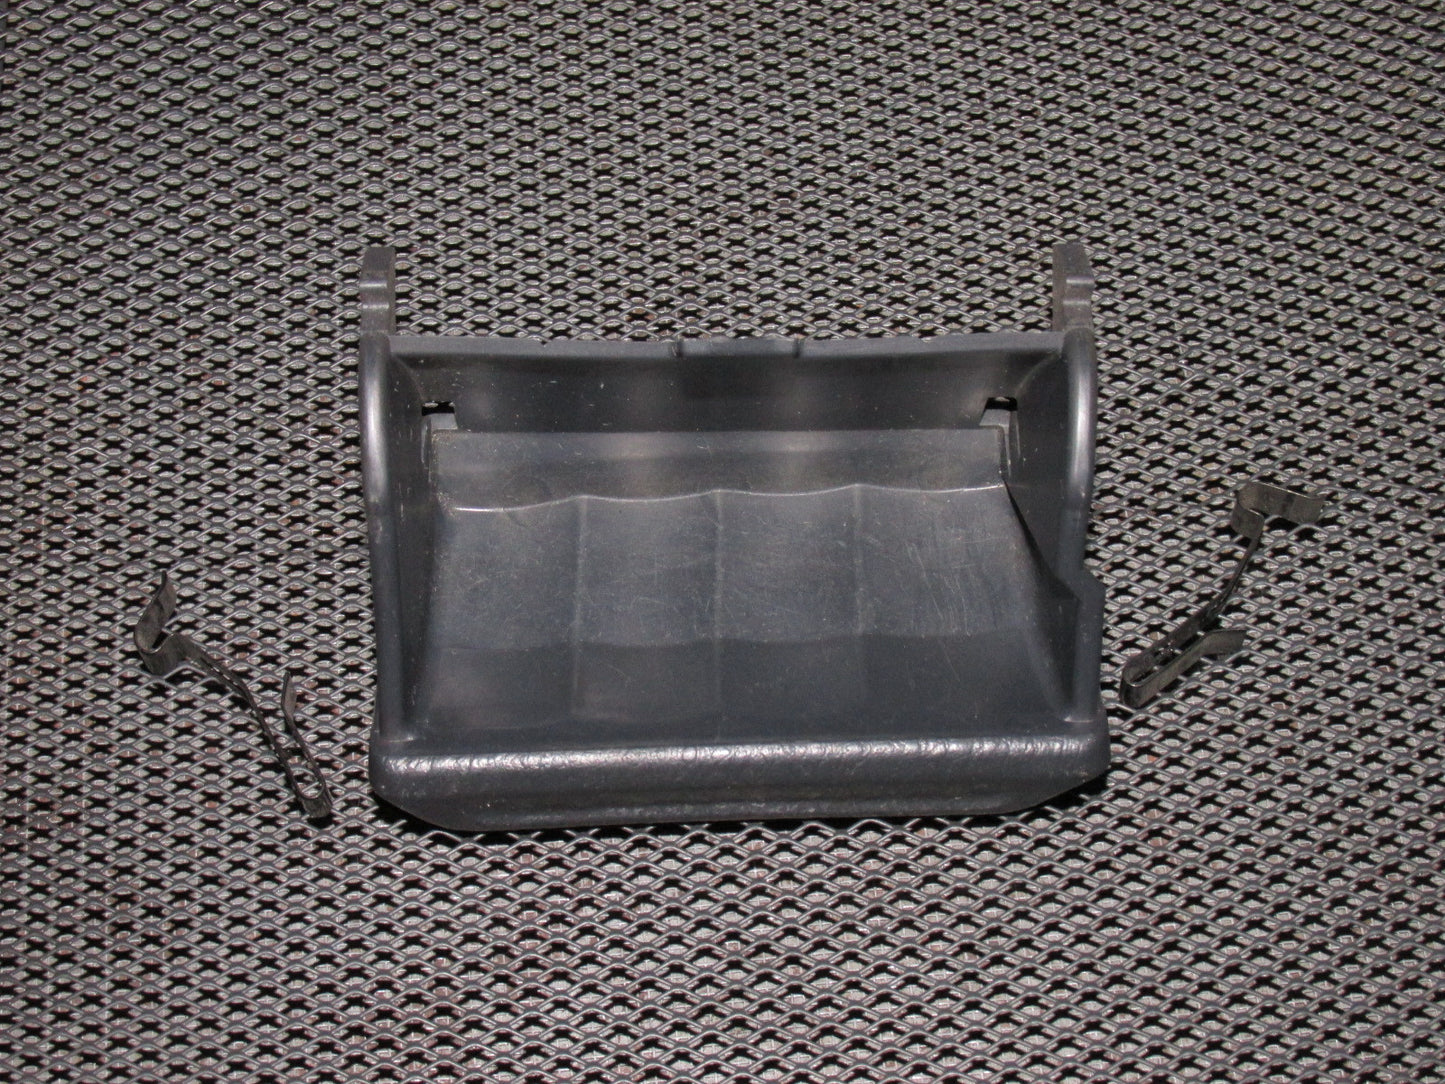 96 97 98 99 00 Honda Civic OEM Dash Coin Pouch Container